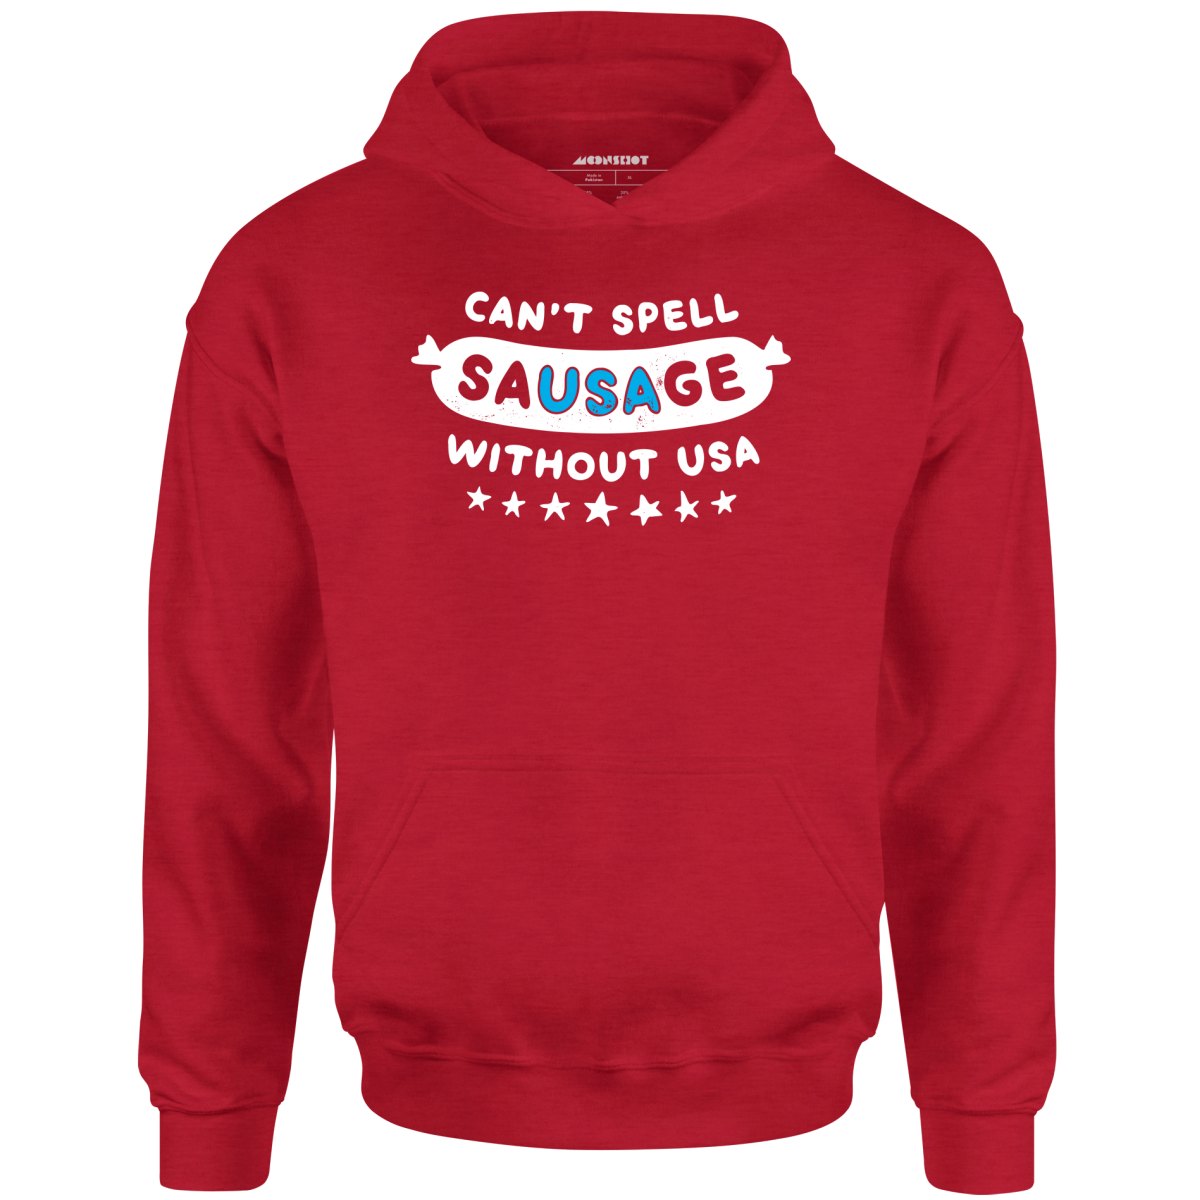 Can't Spell Sausage Without USA - Unisex Hoodie